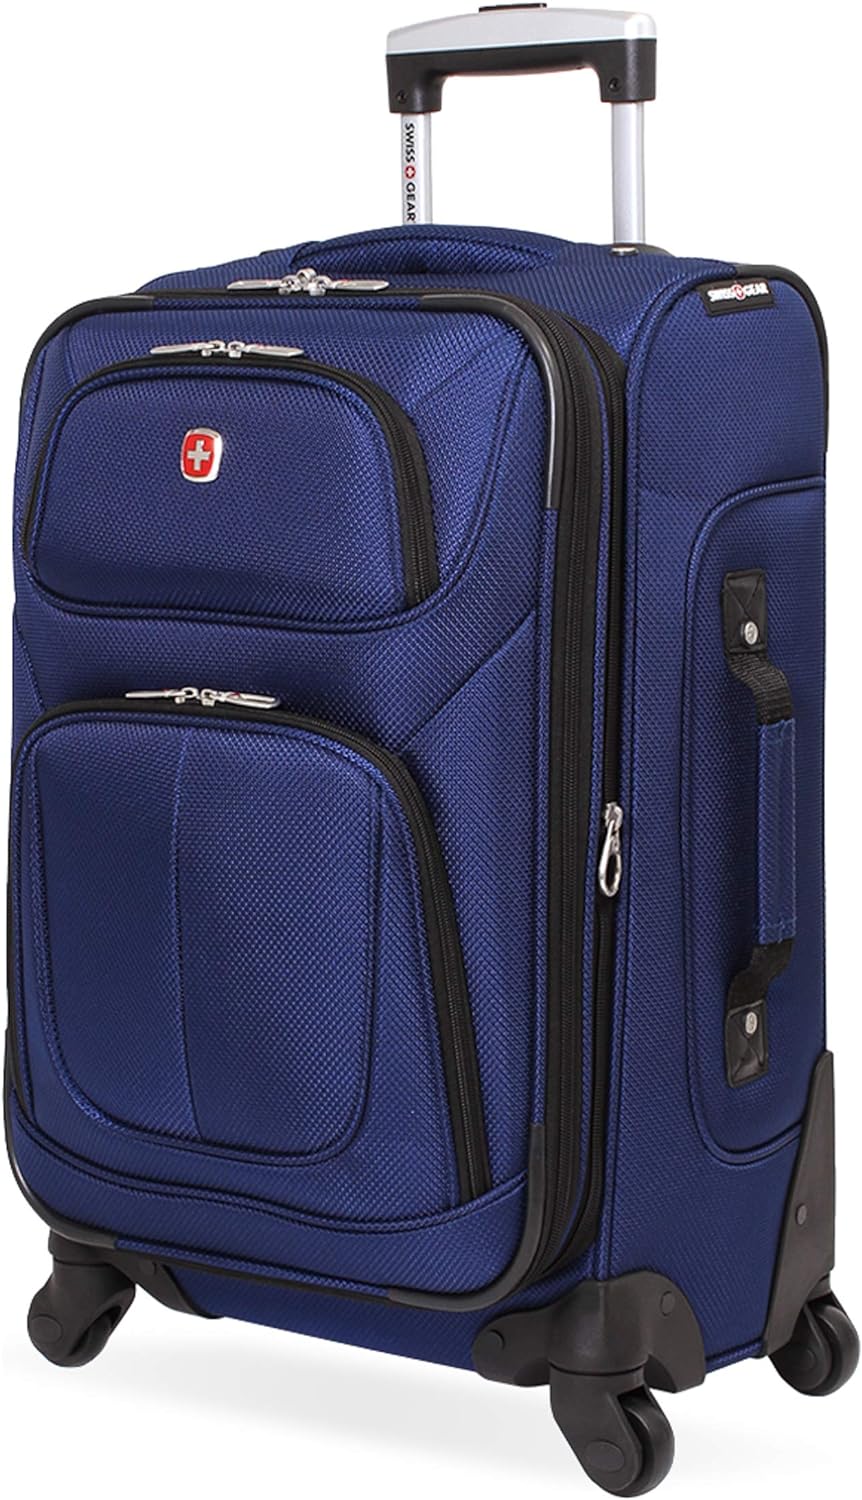 You are currently viewing SwissGear Expandable Roller Luggage: 100% Satisfaction Guaranteed for Exceptional Mobility, Effortless Handling, and Spacious Storage